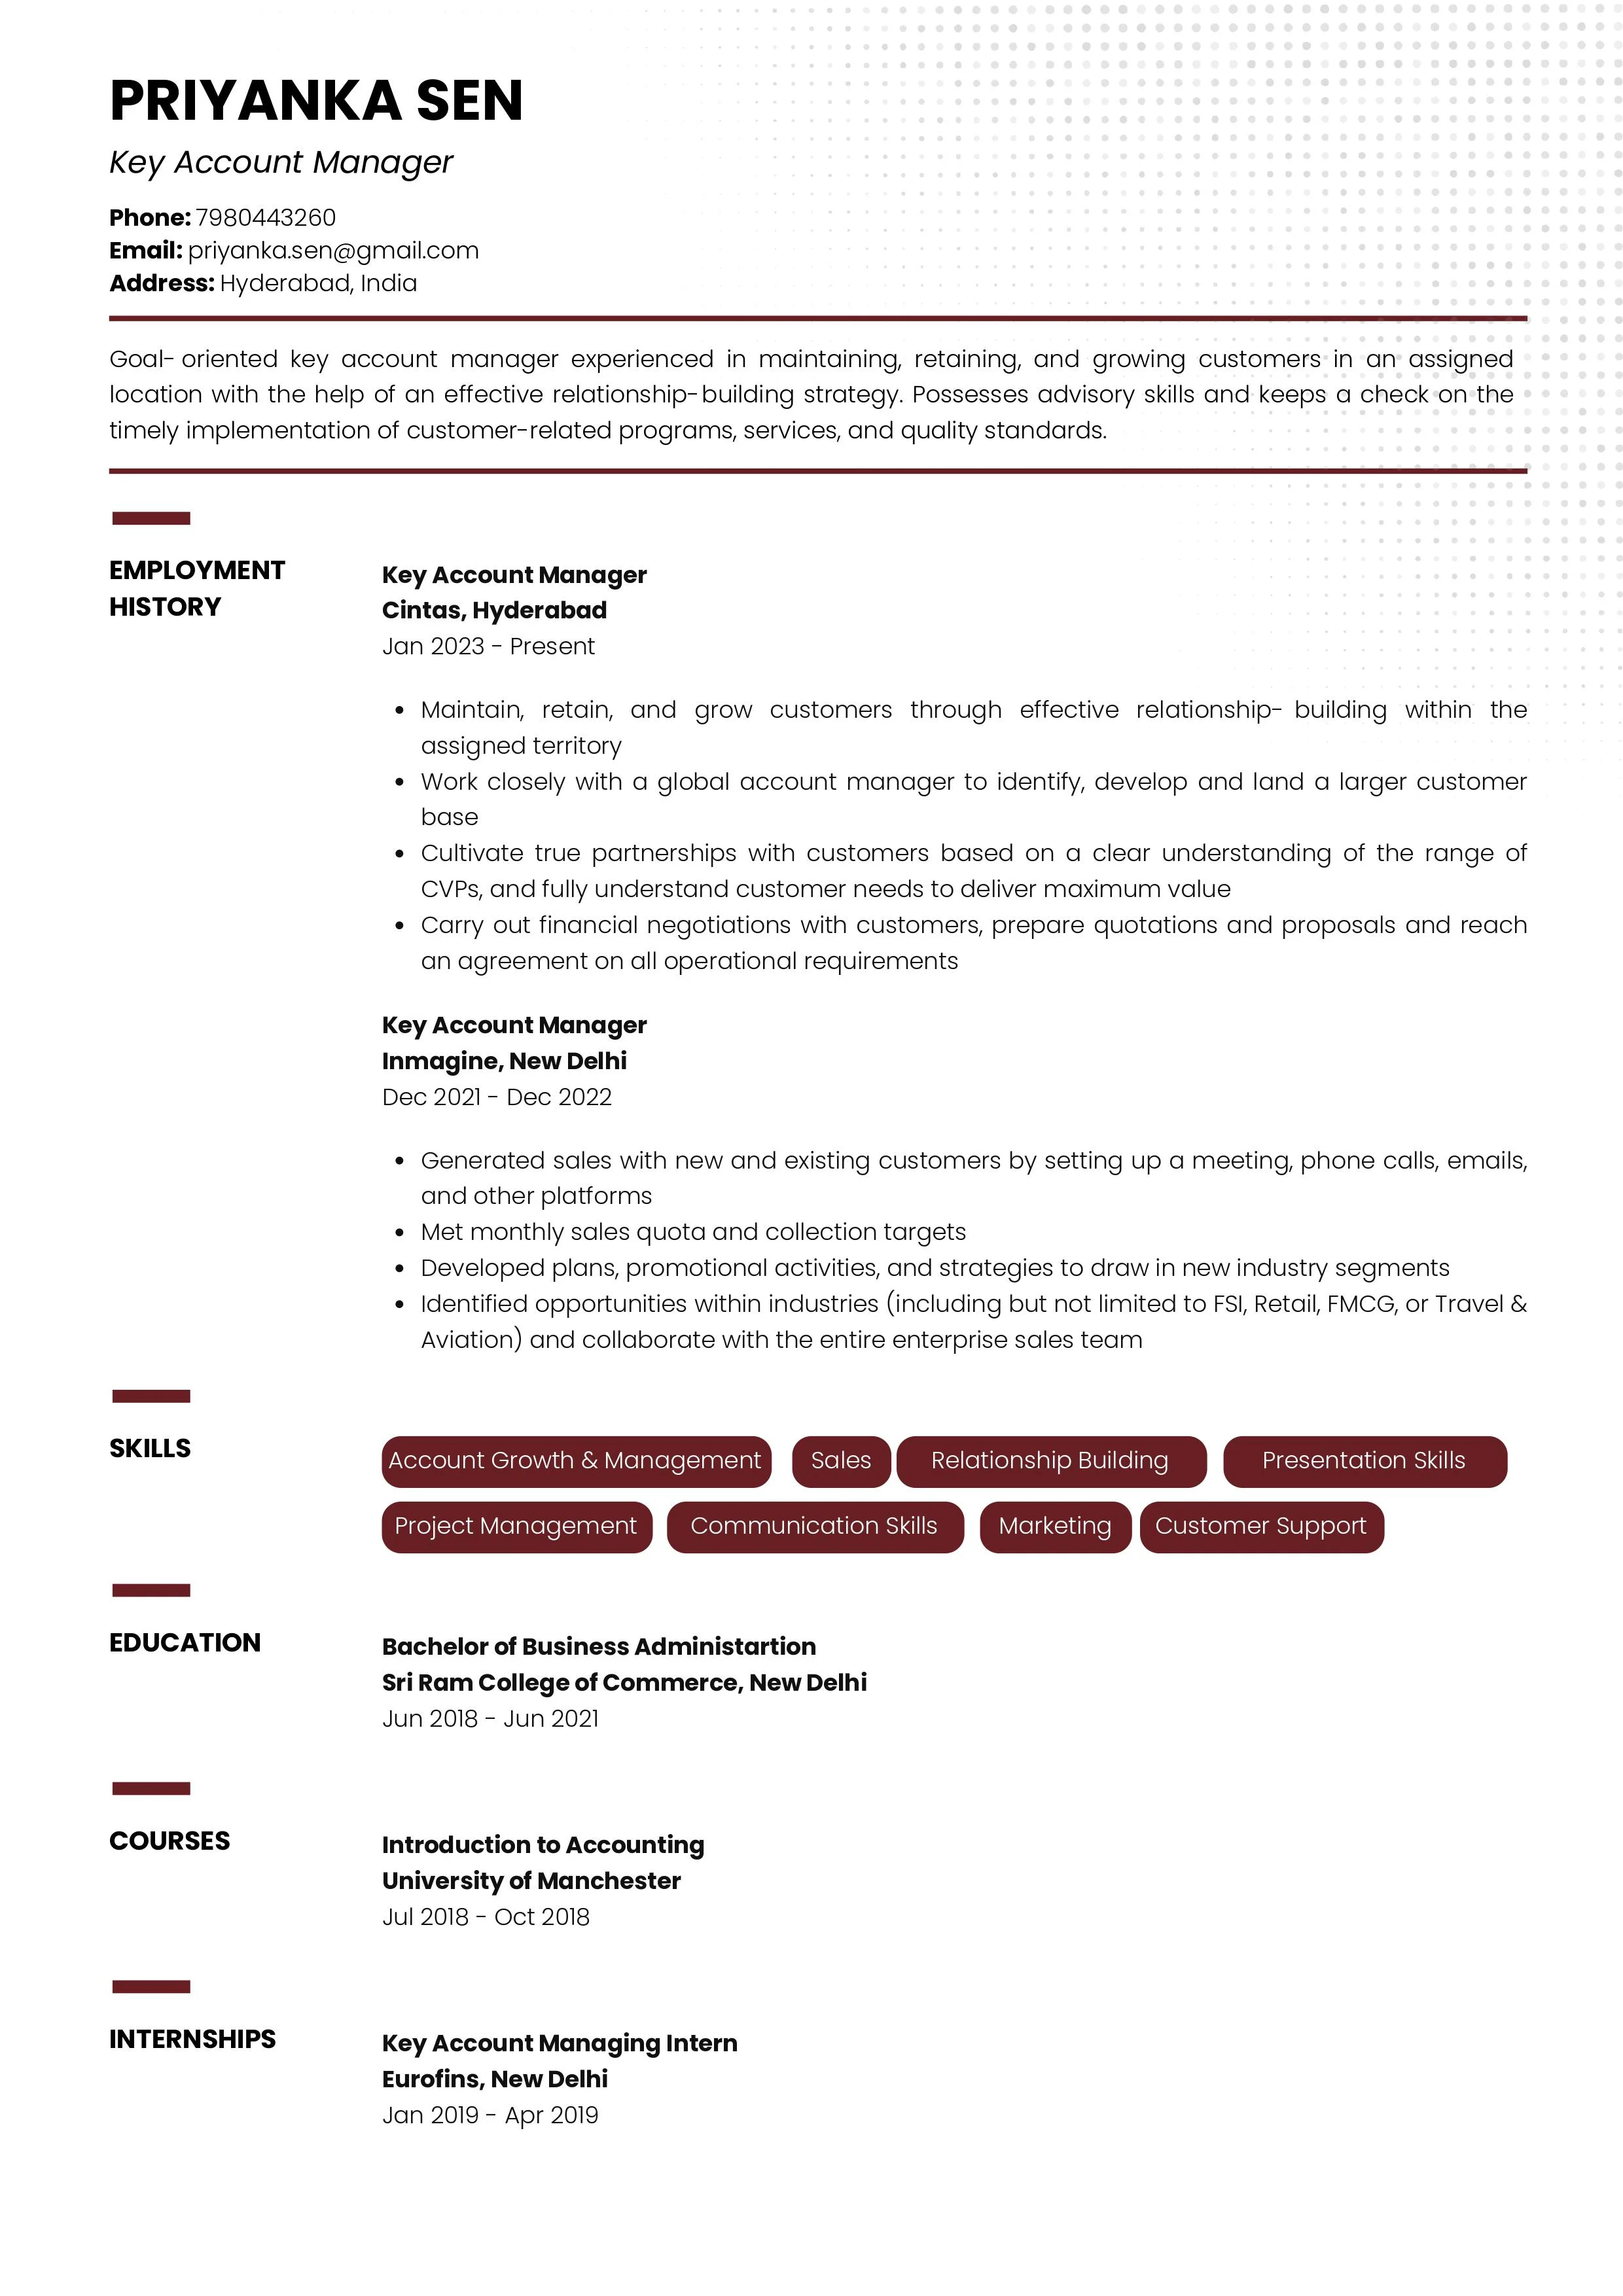 Sample Resume of Key Account Manager | Free Resume Templates & Samples on Resumod.co